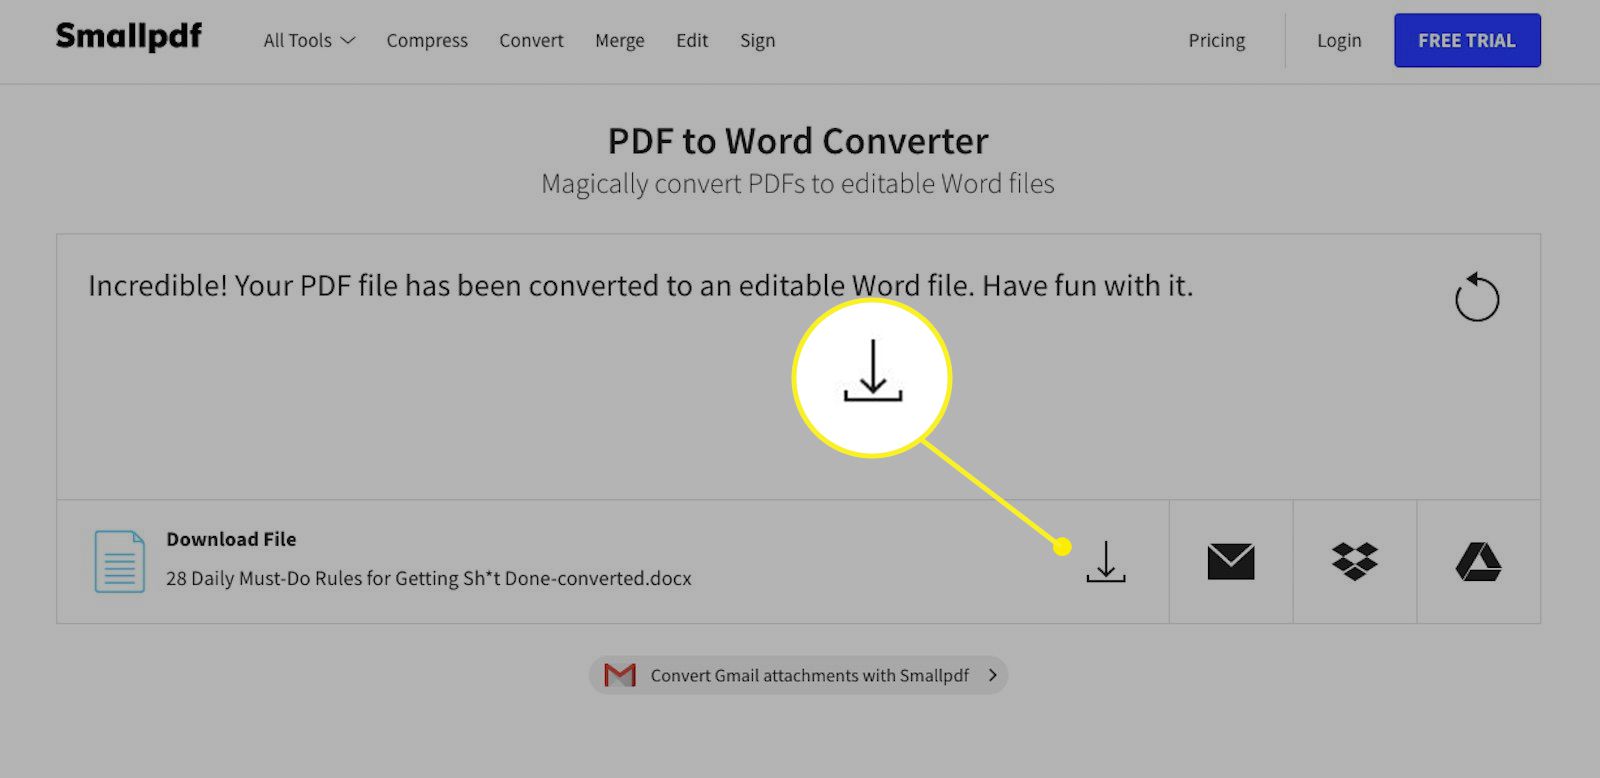 solid pdf to word for mac